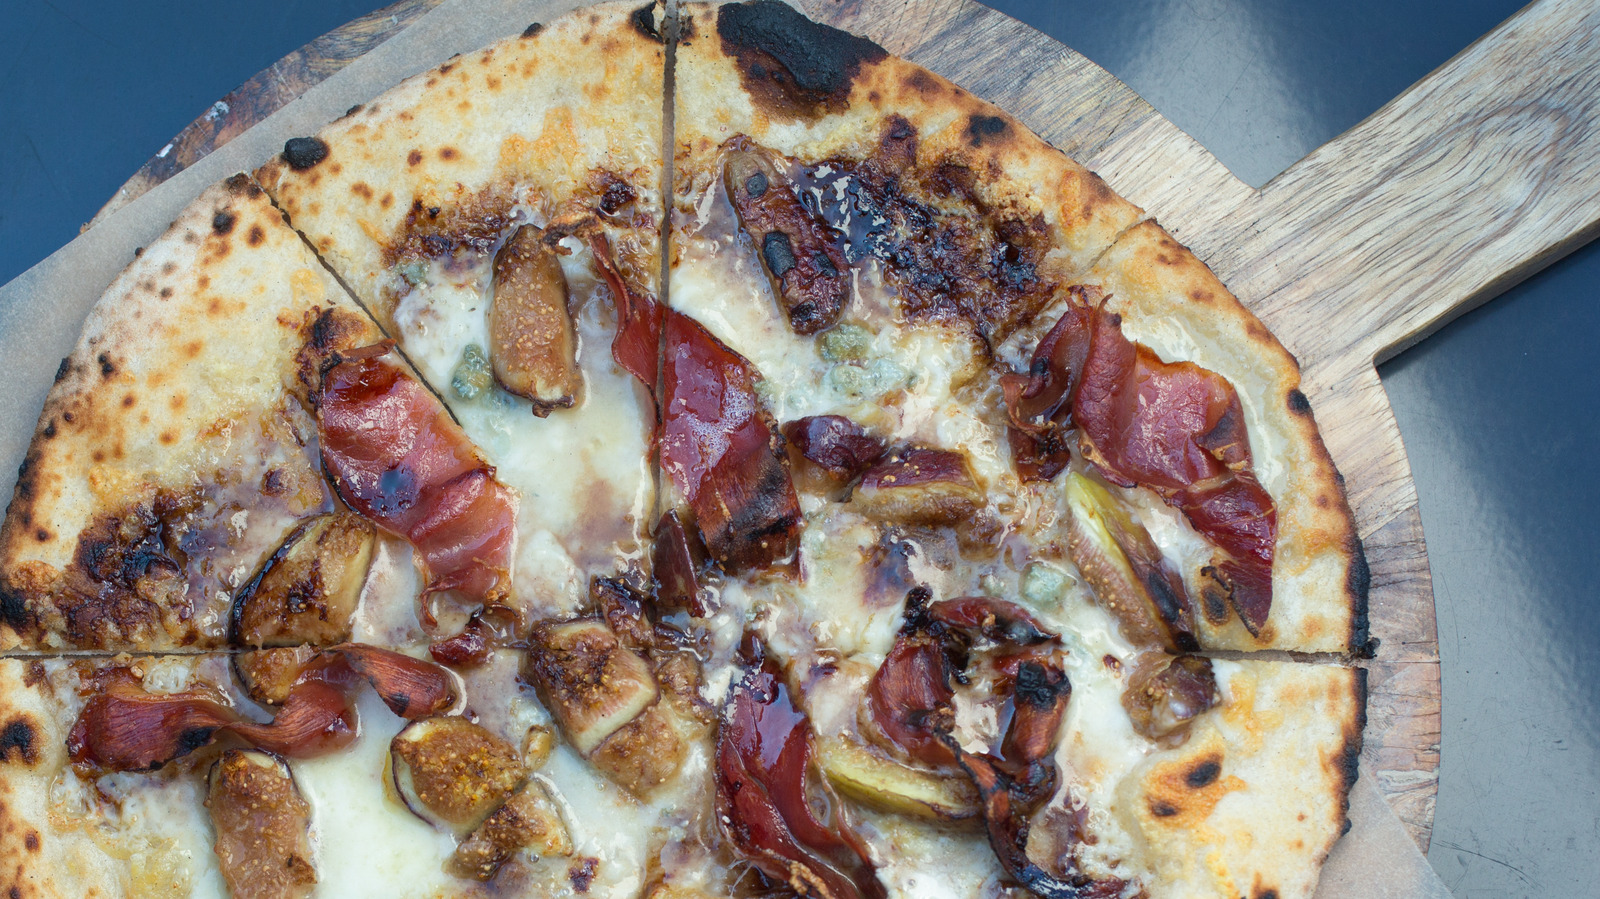 For Delicious Gourmet Pizza Canned Figs Are Just As Good As Fresh